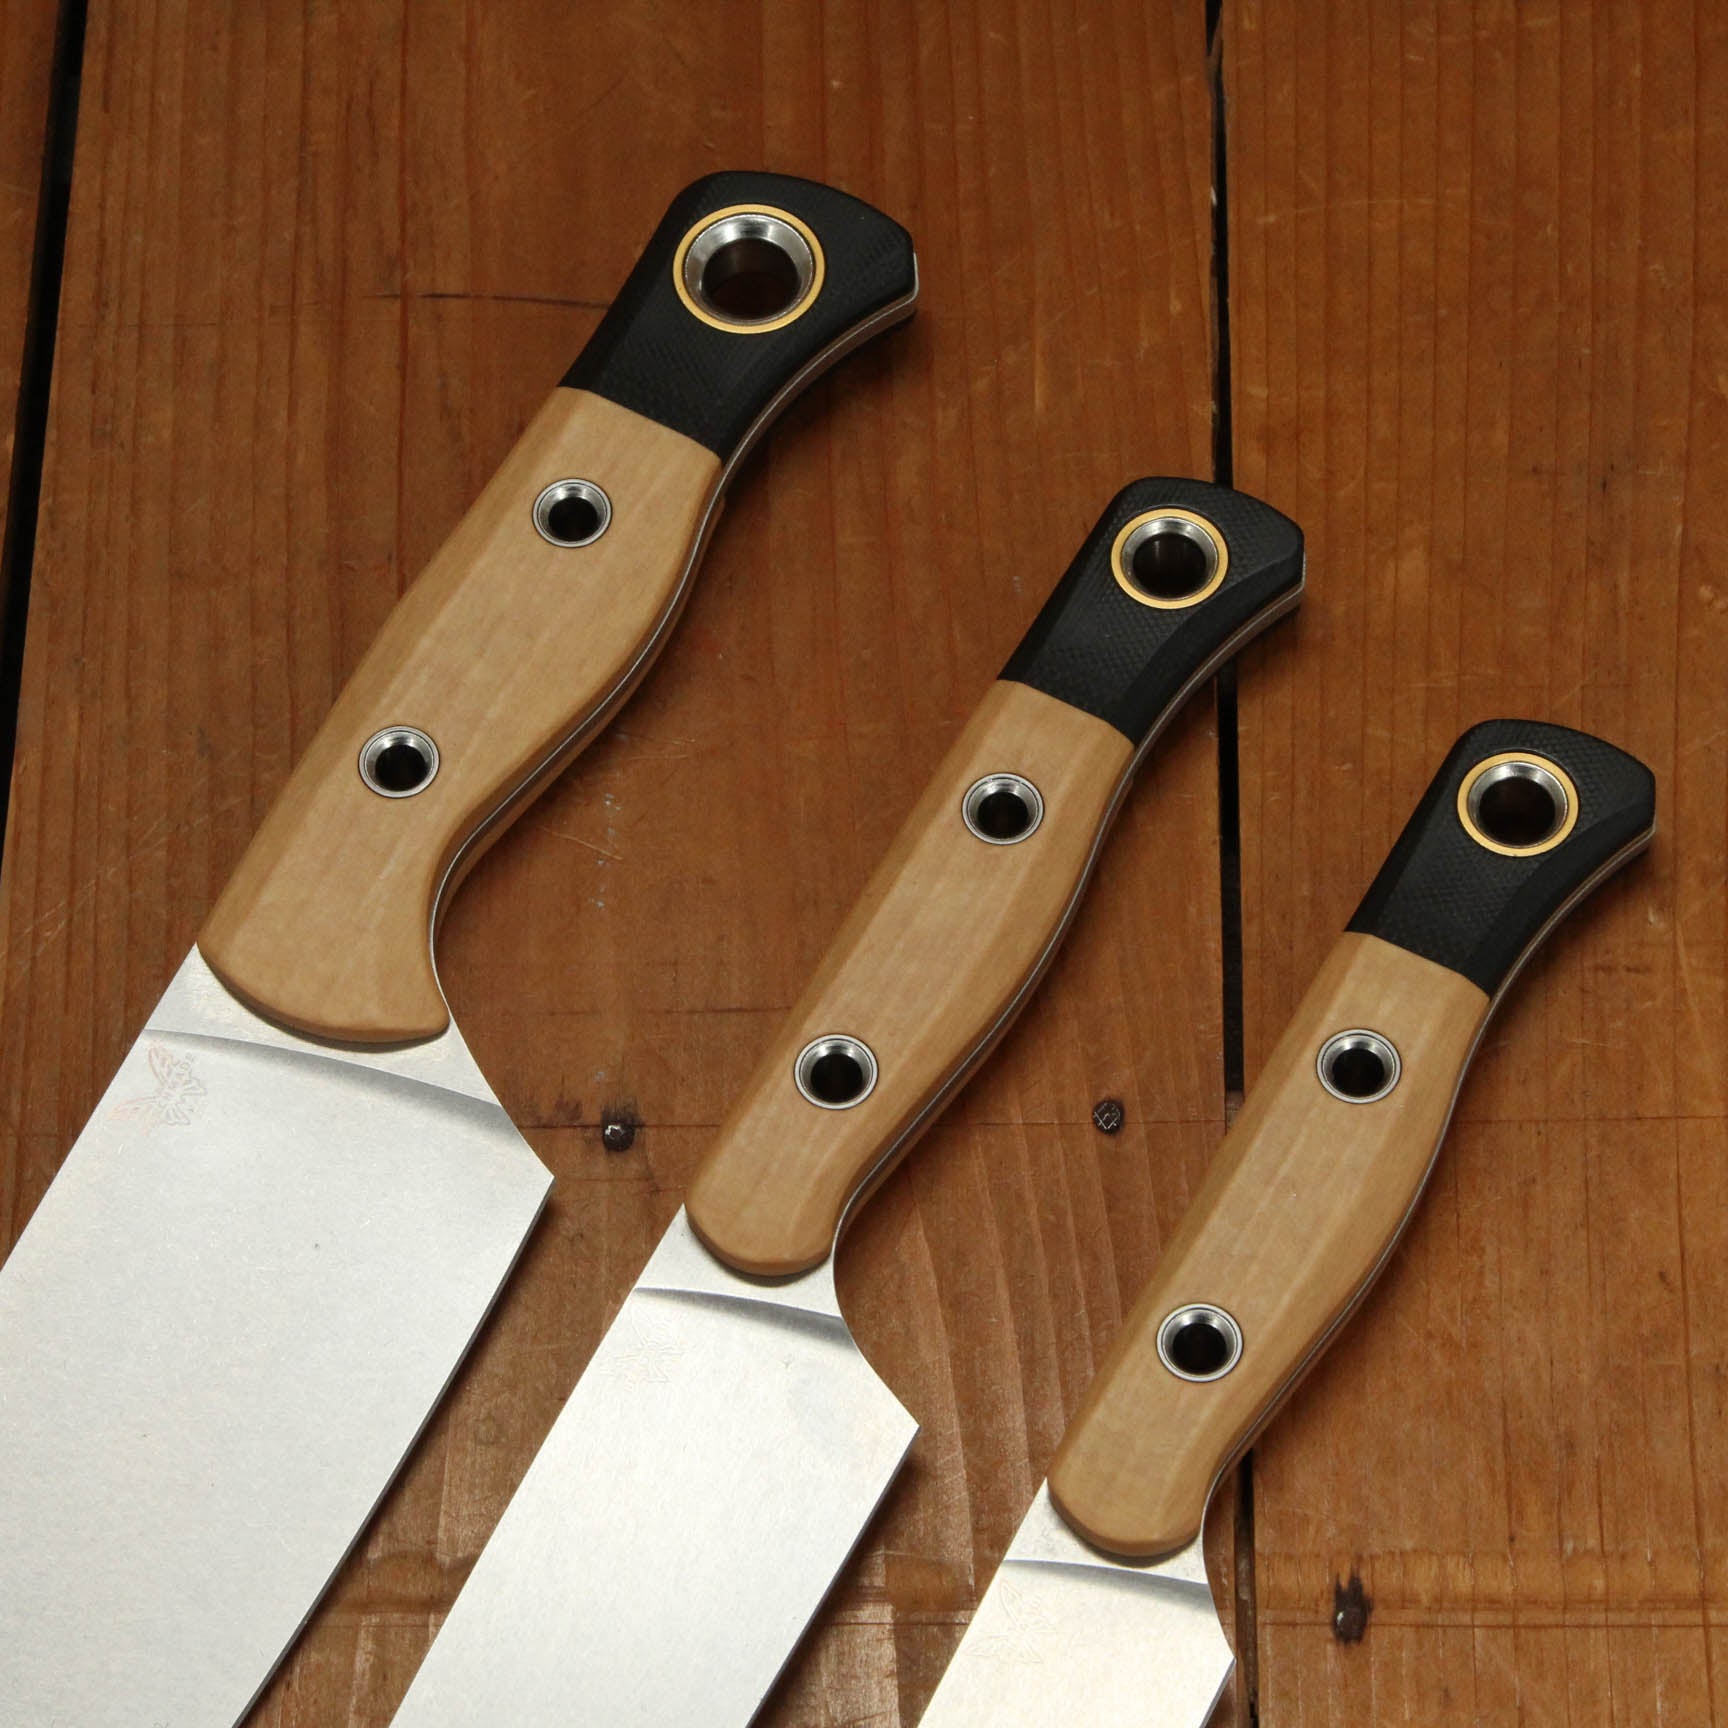 Benchmade Three-Piece Chef's Knife Set Review: Light and Sharp